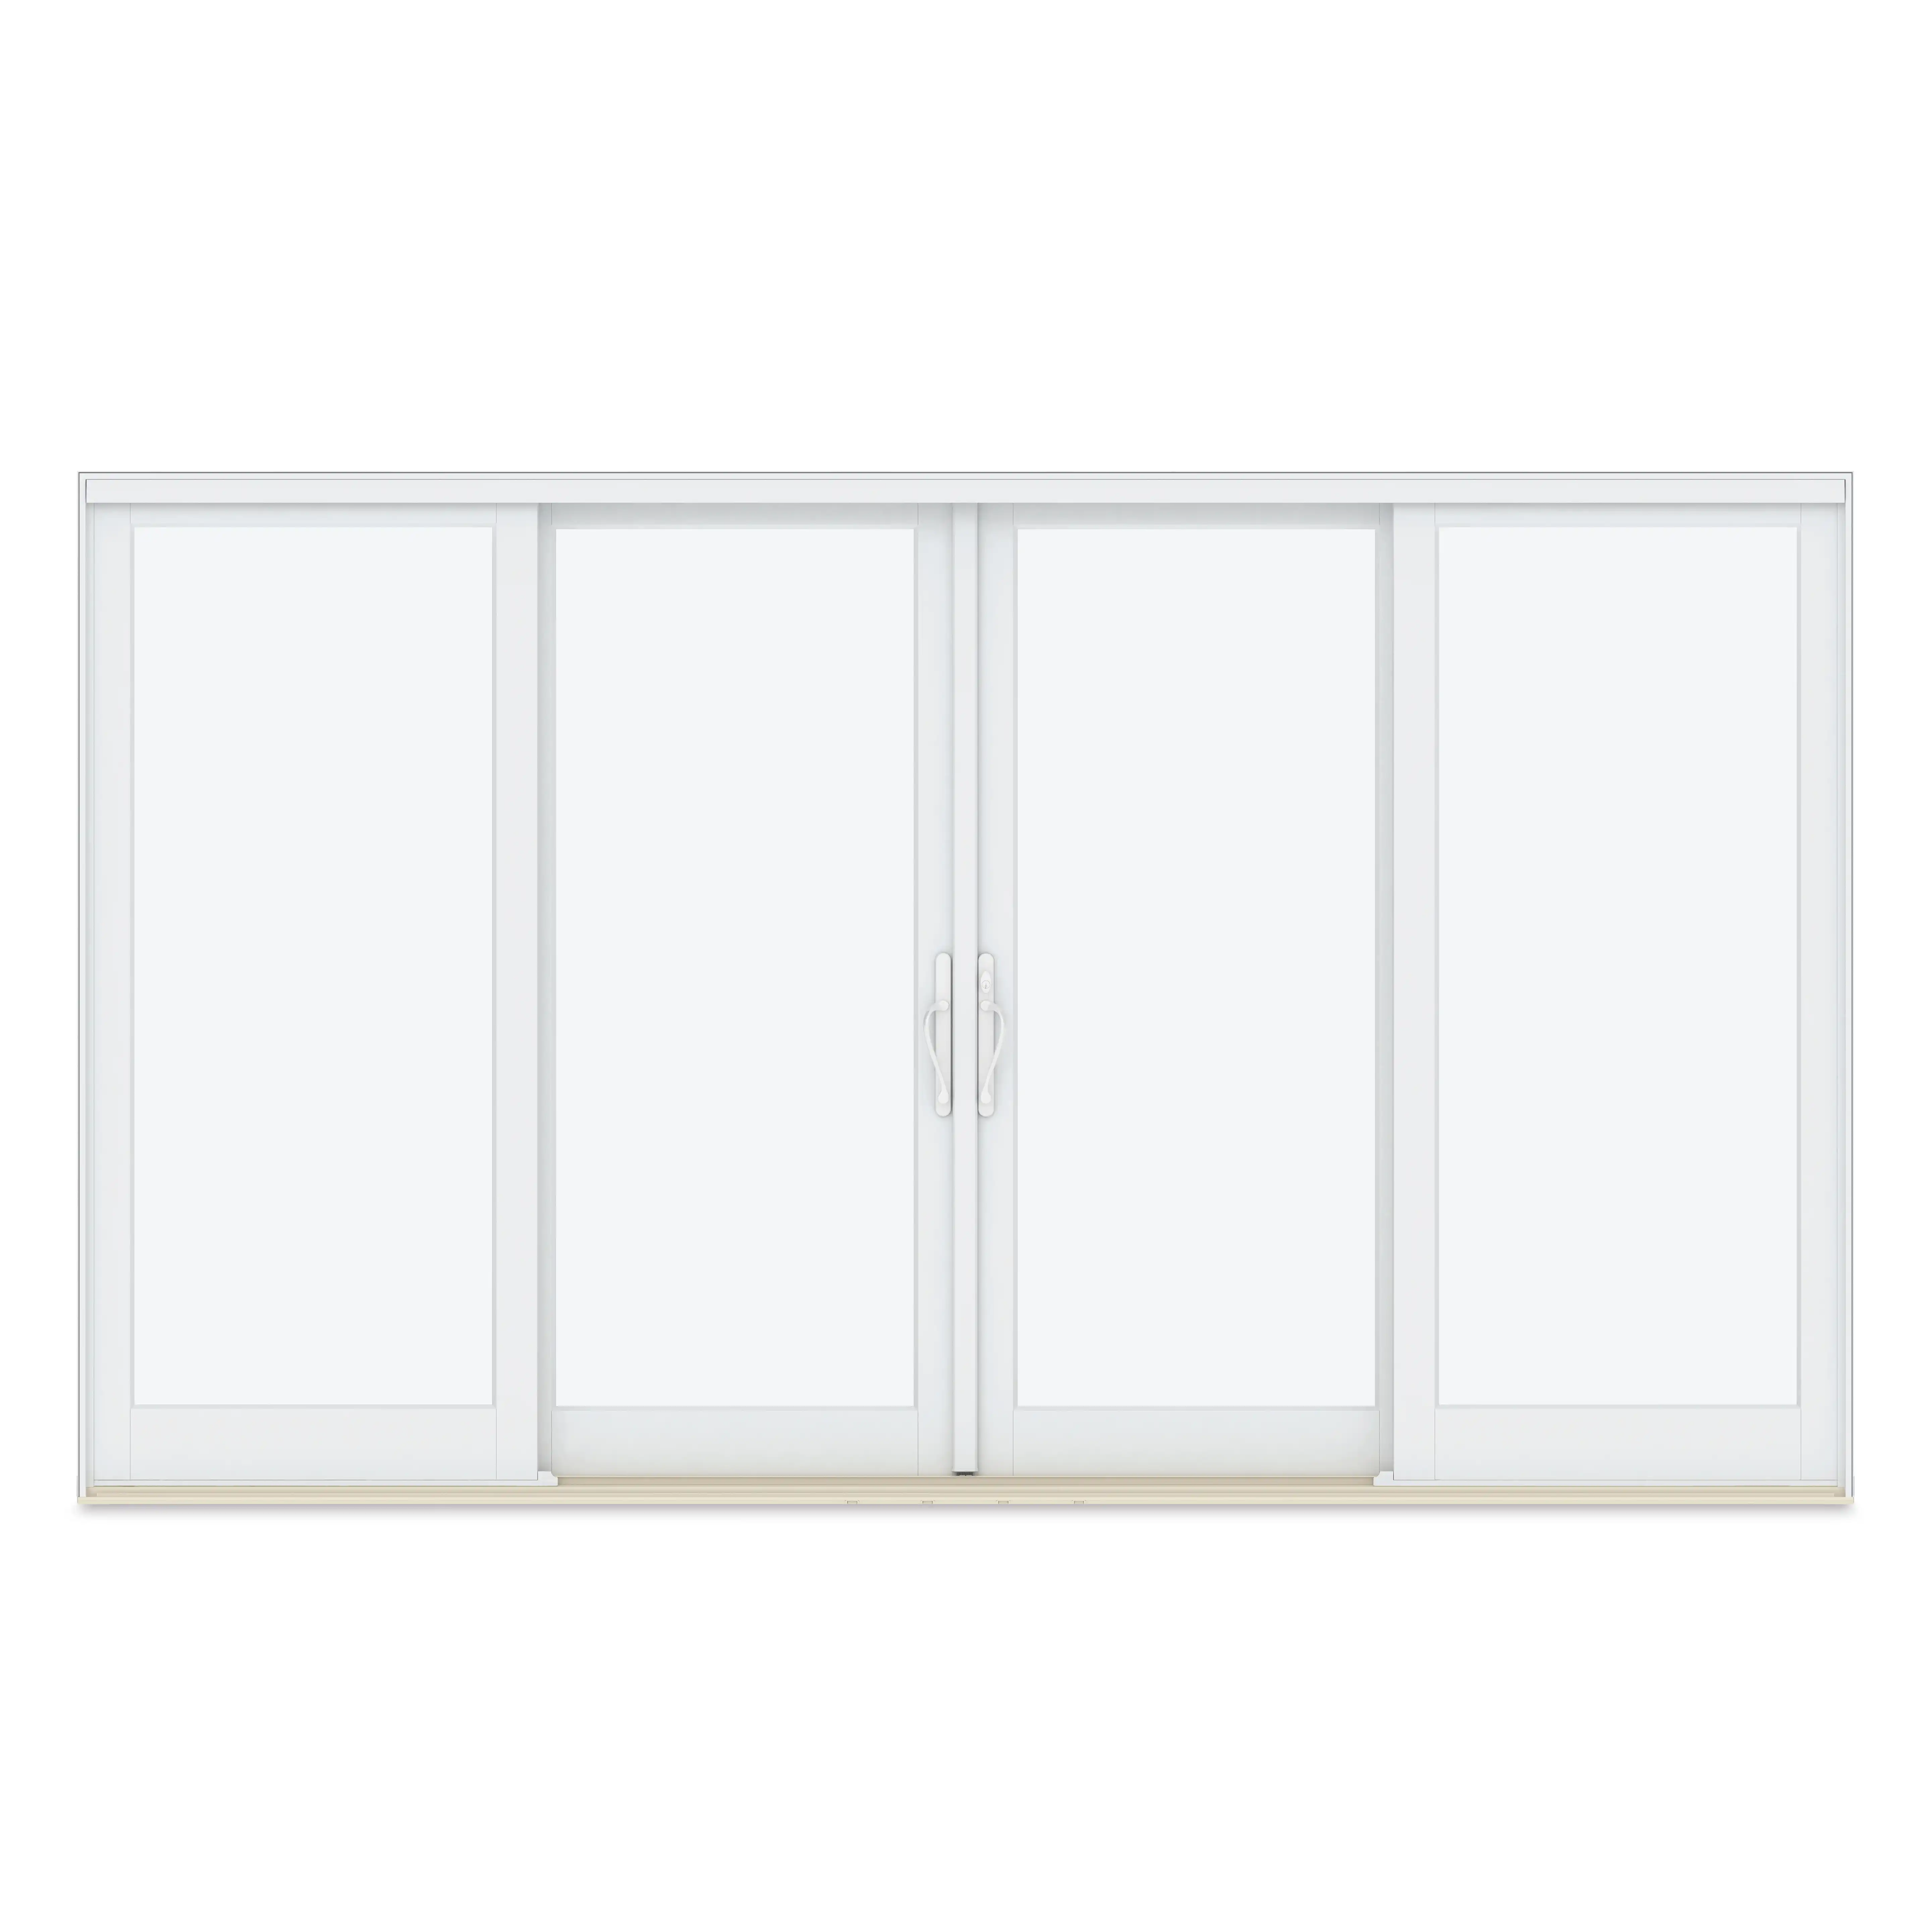 A white Marvin Replacement four-panel sliding French door that parts in the middle.